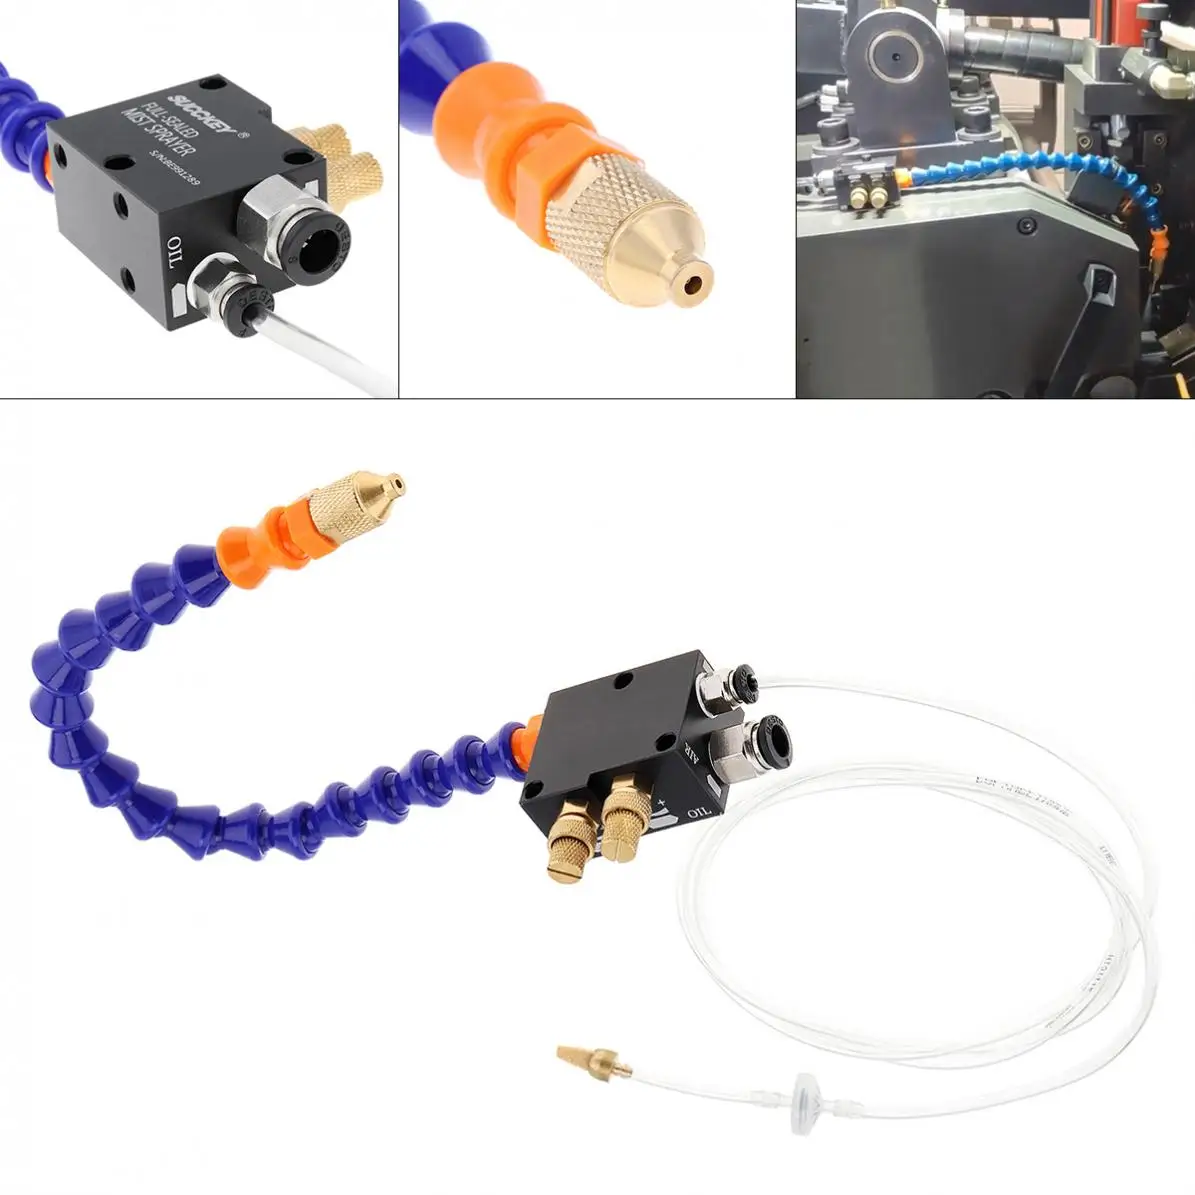 

30cm Mist Coolant Lubrication Spray System with 0.6mm Inner Diameter Micro Nozzle for Metal Cutting Engraving Cooling Machine